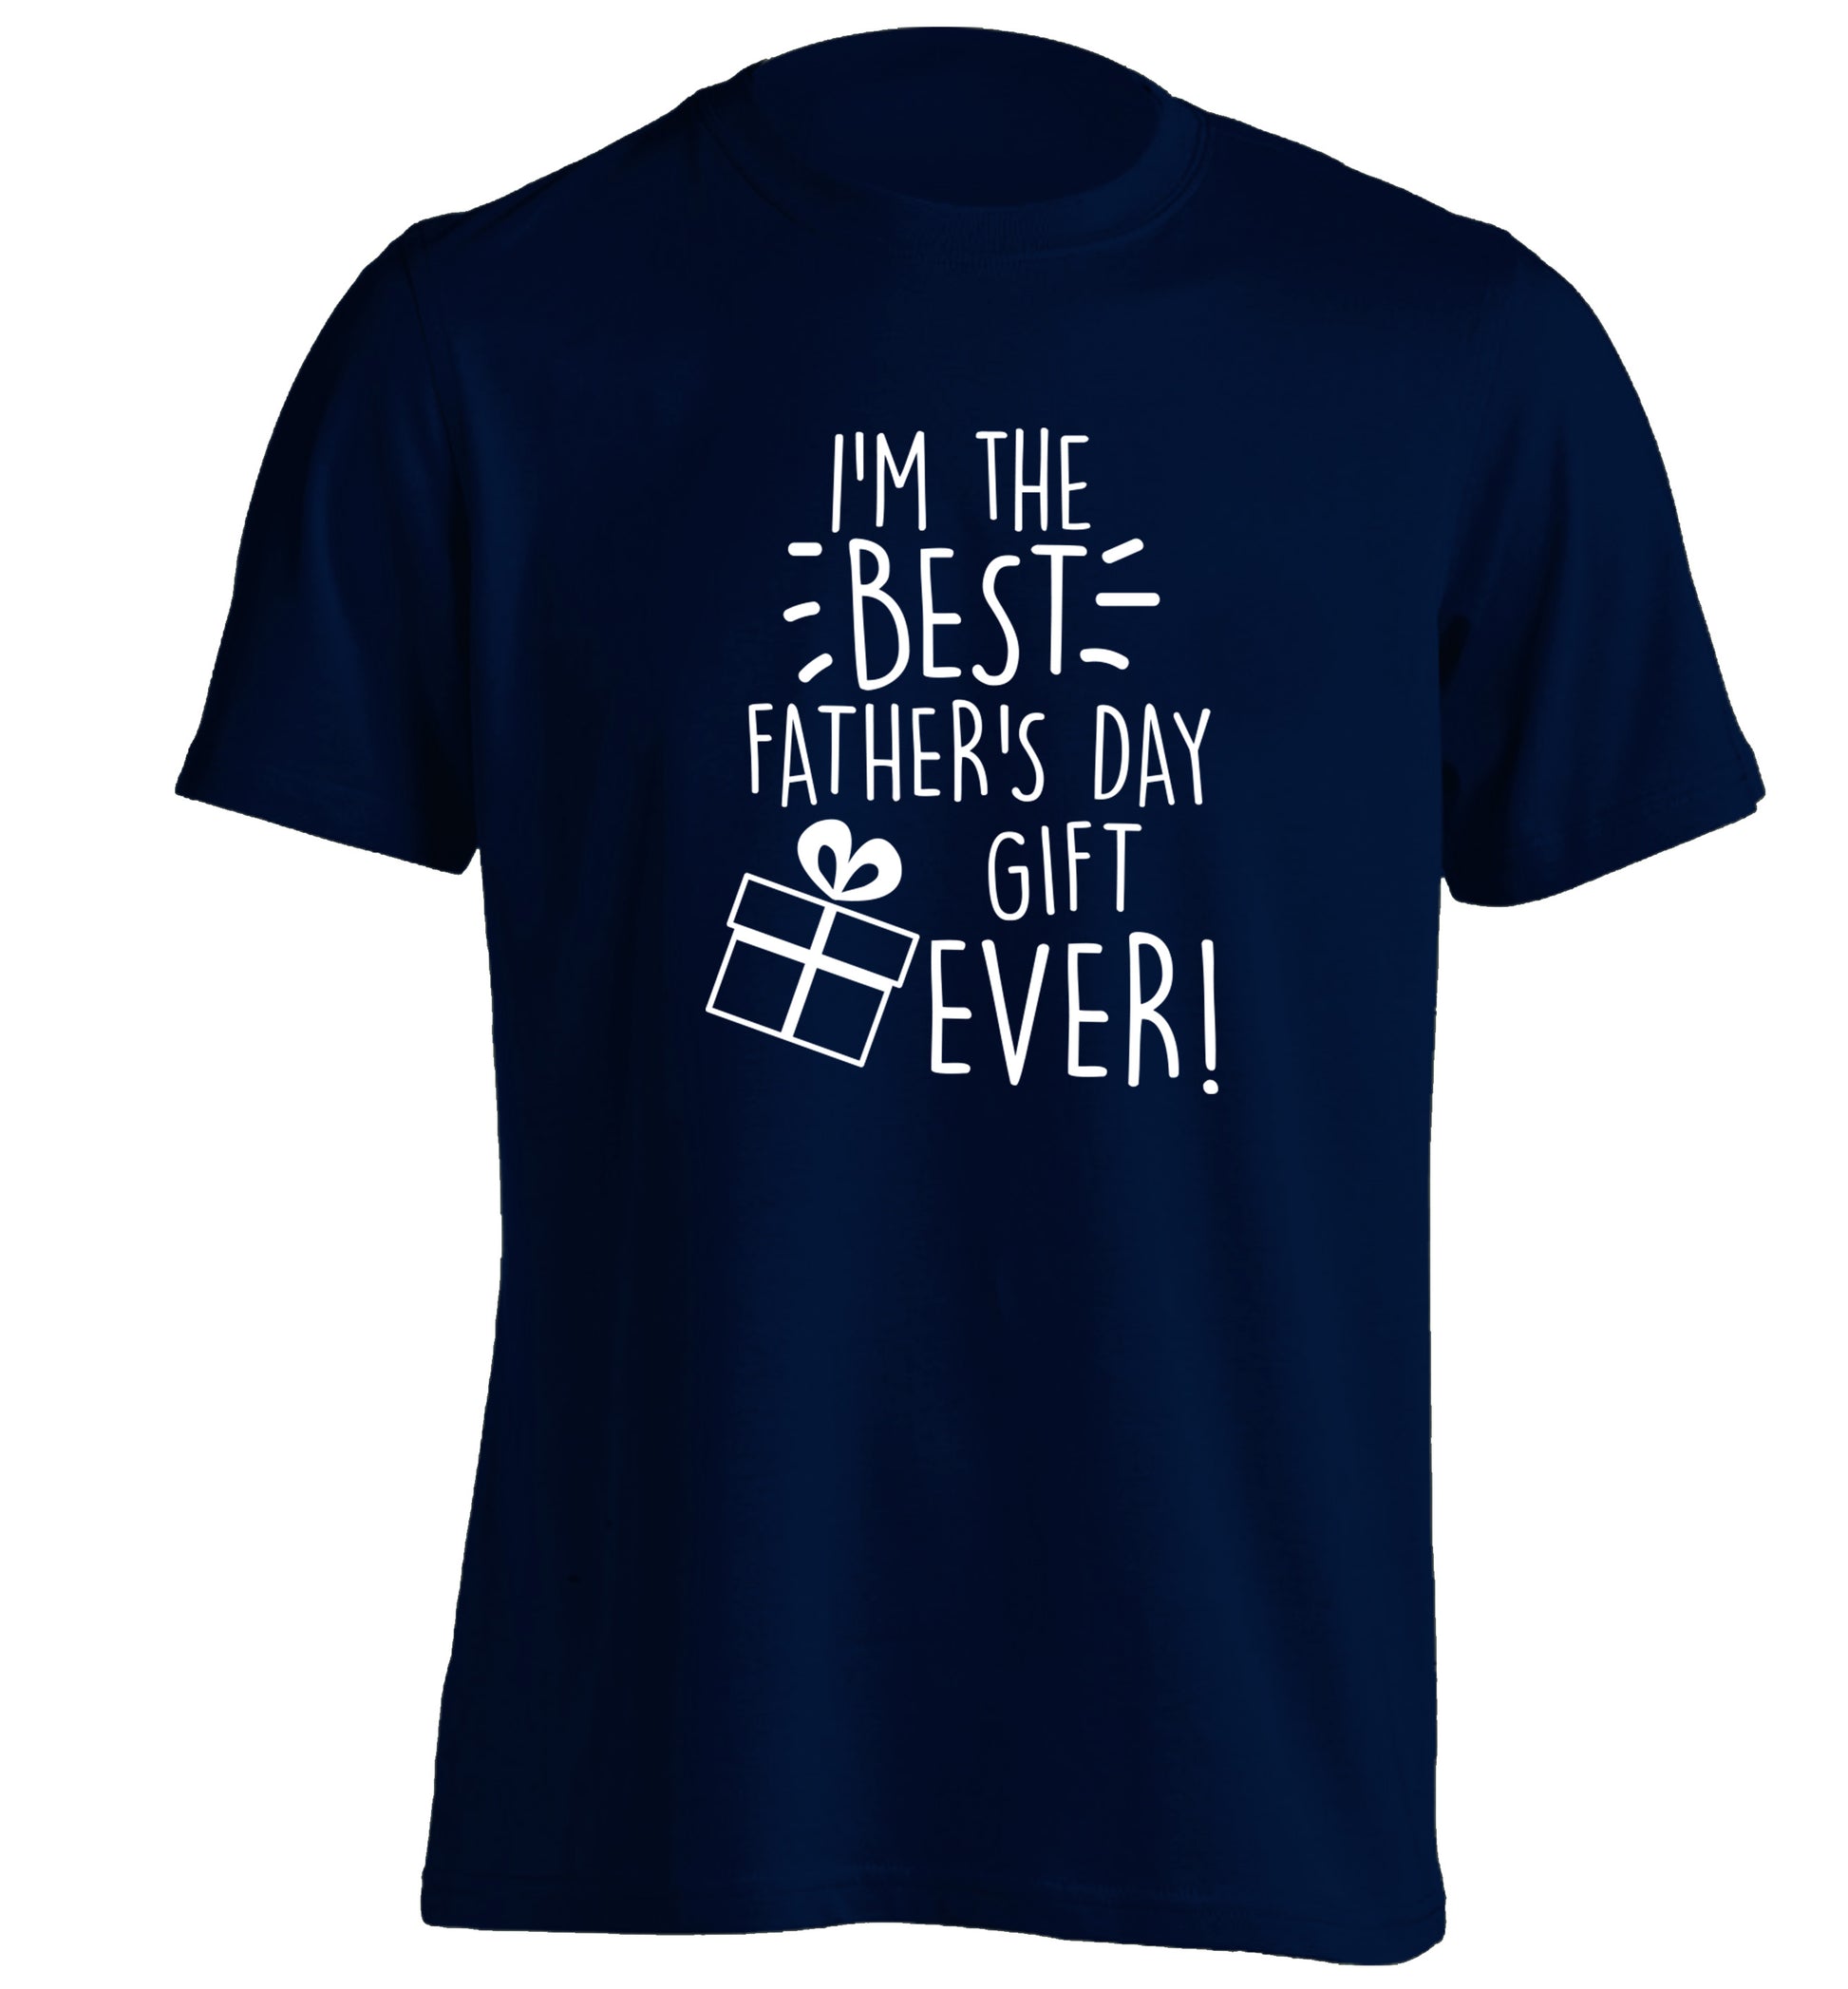 I'm the BEST father's day gift ever! adults unisex navy Tshirt 2XL